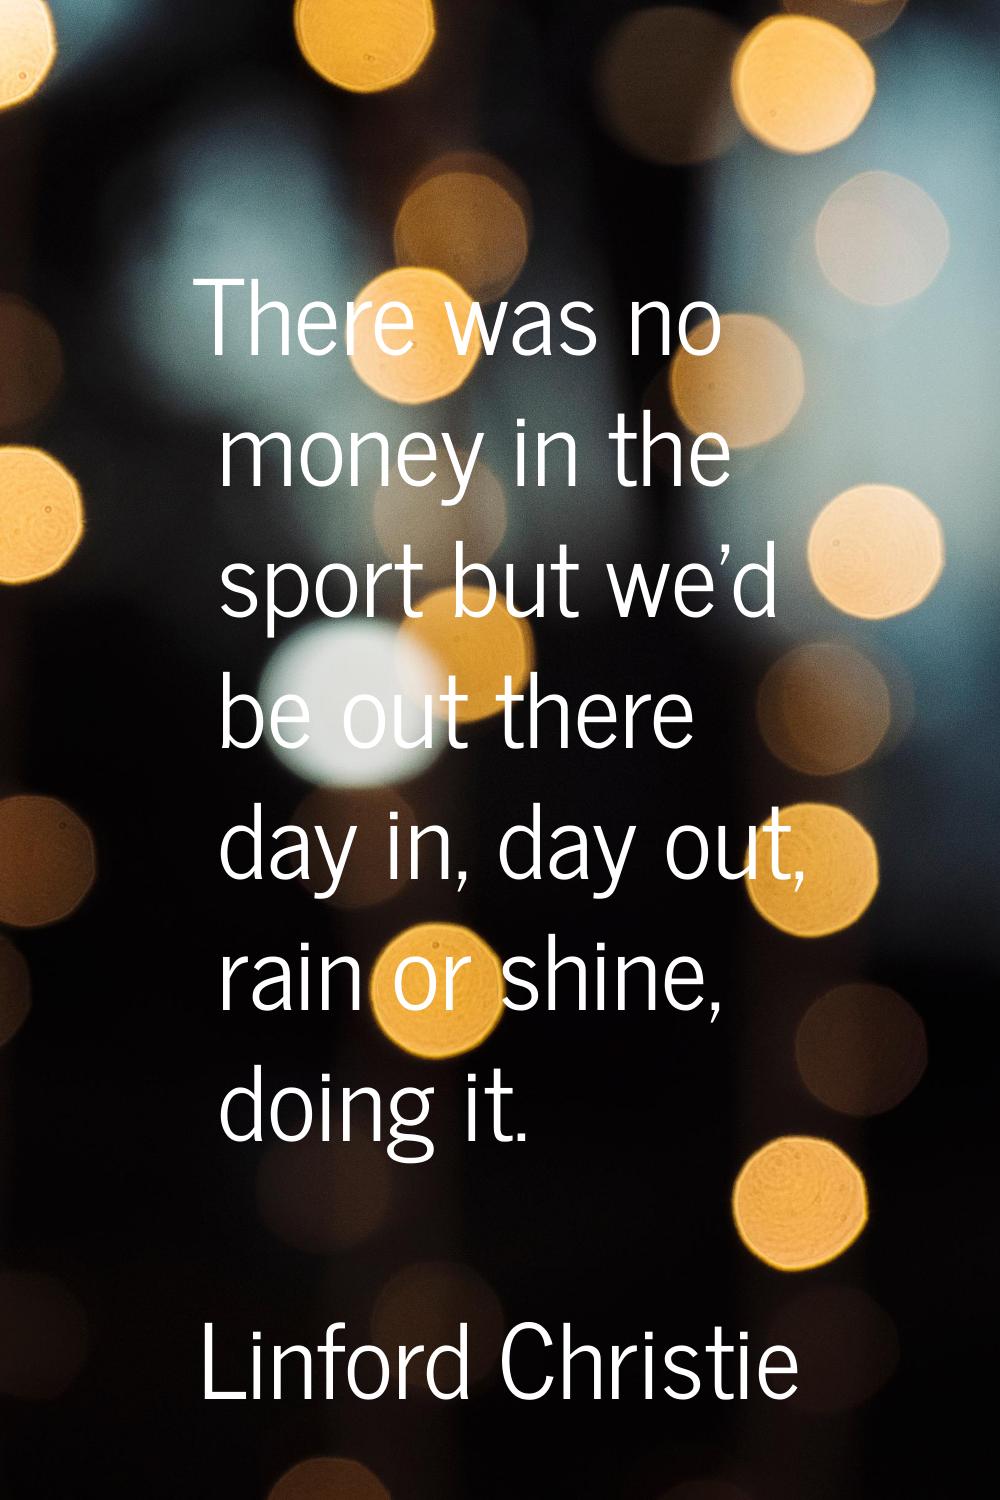 There was no money in the sport but we'd be out there day in, day out, rain or shine, doing it.